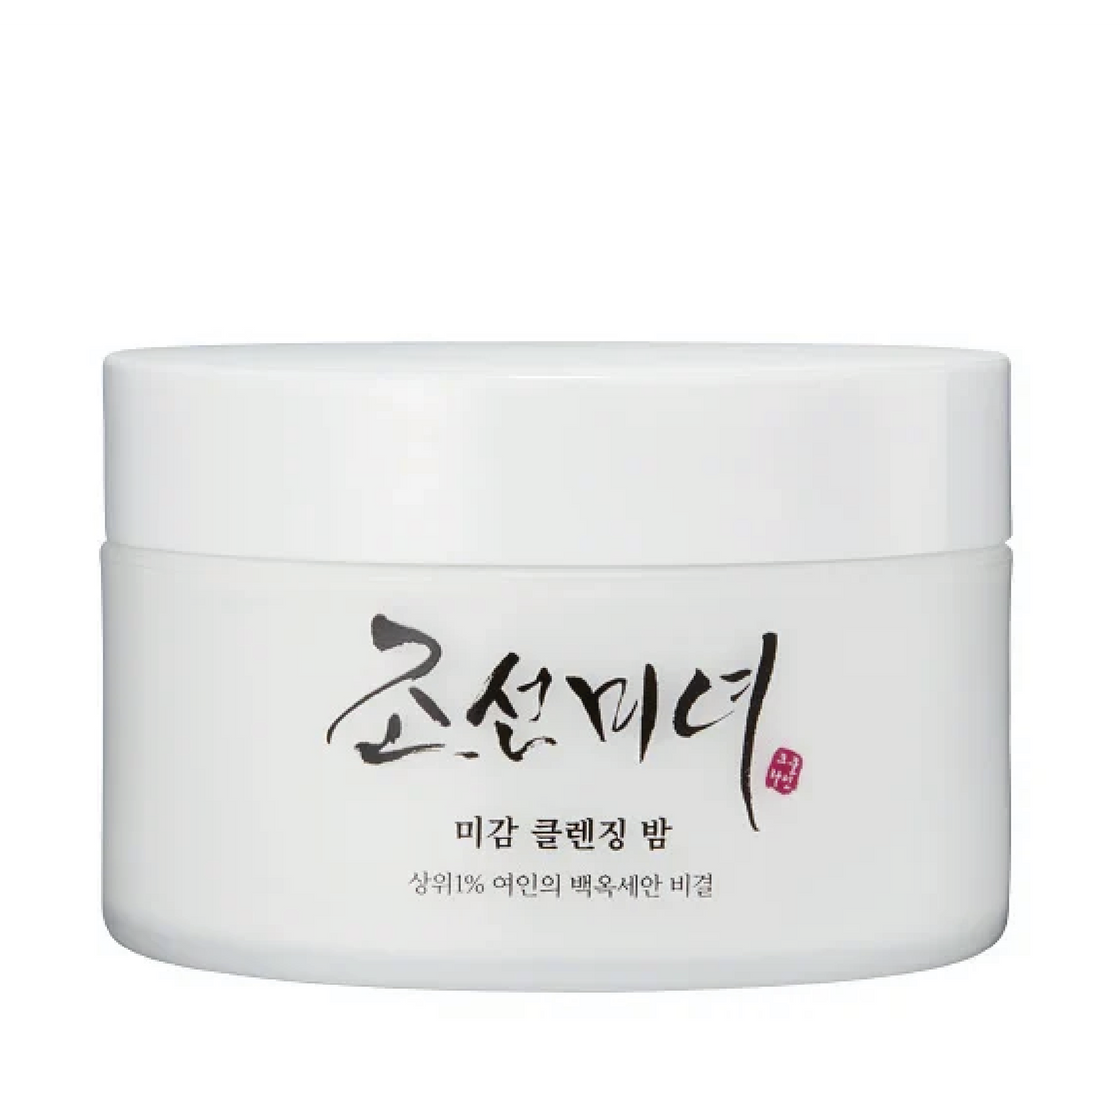 Beauty of joseon | Bálsamo limpiador Radiance Cleansing Balm